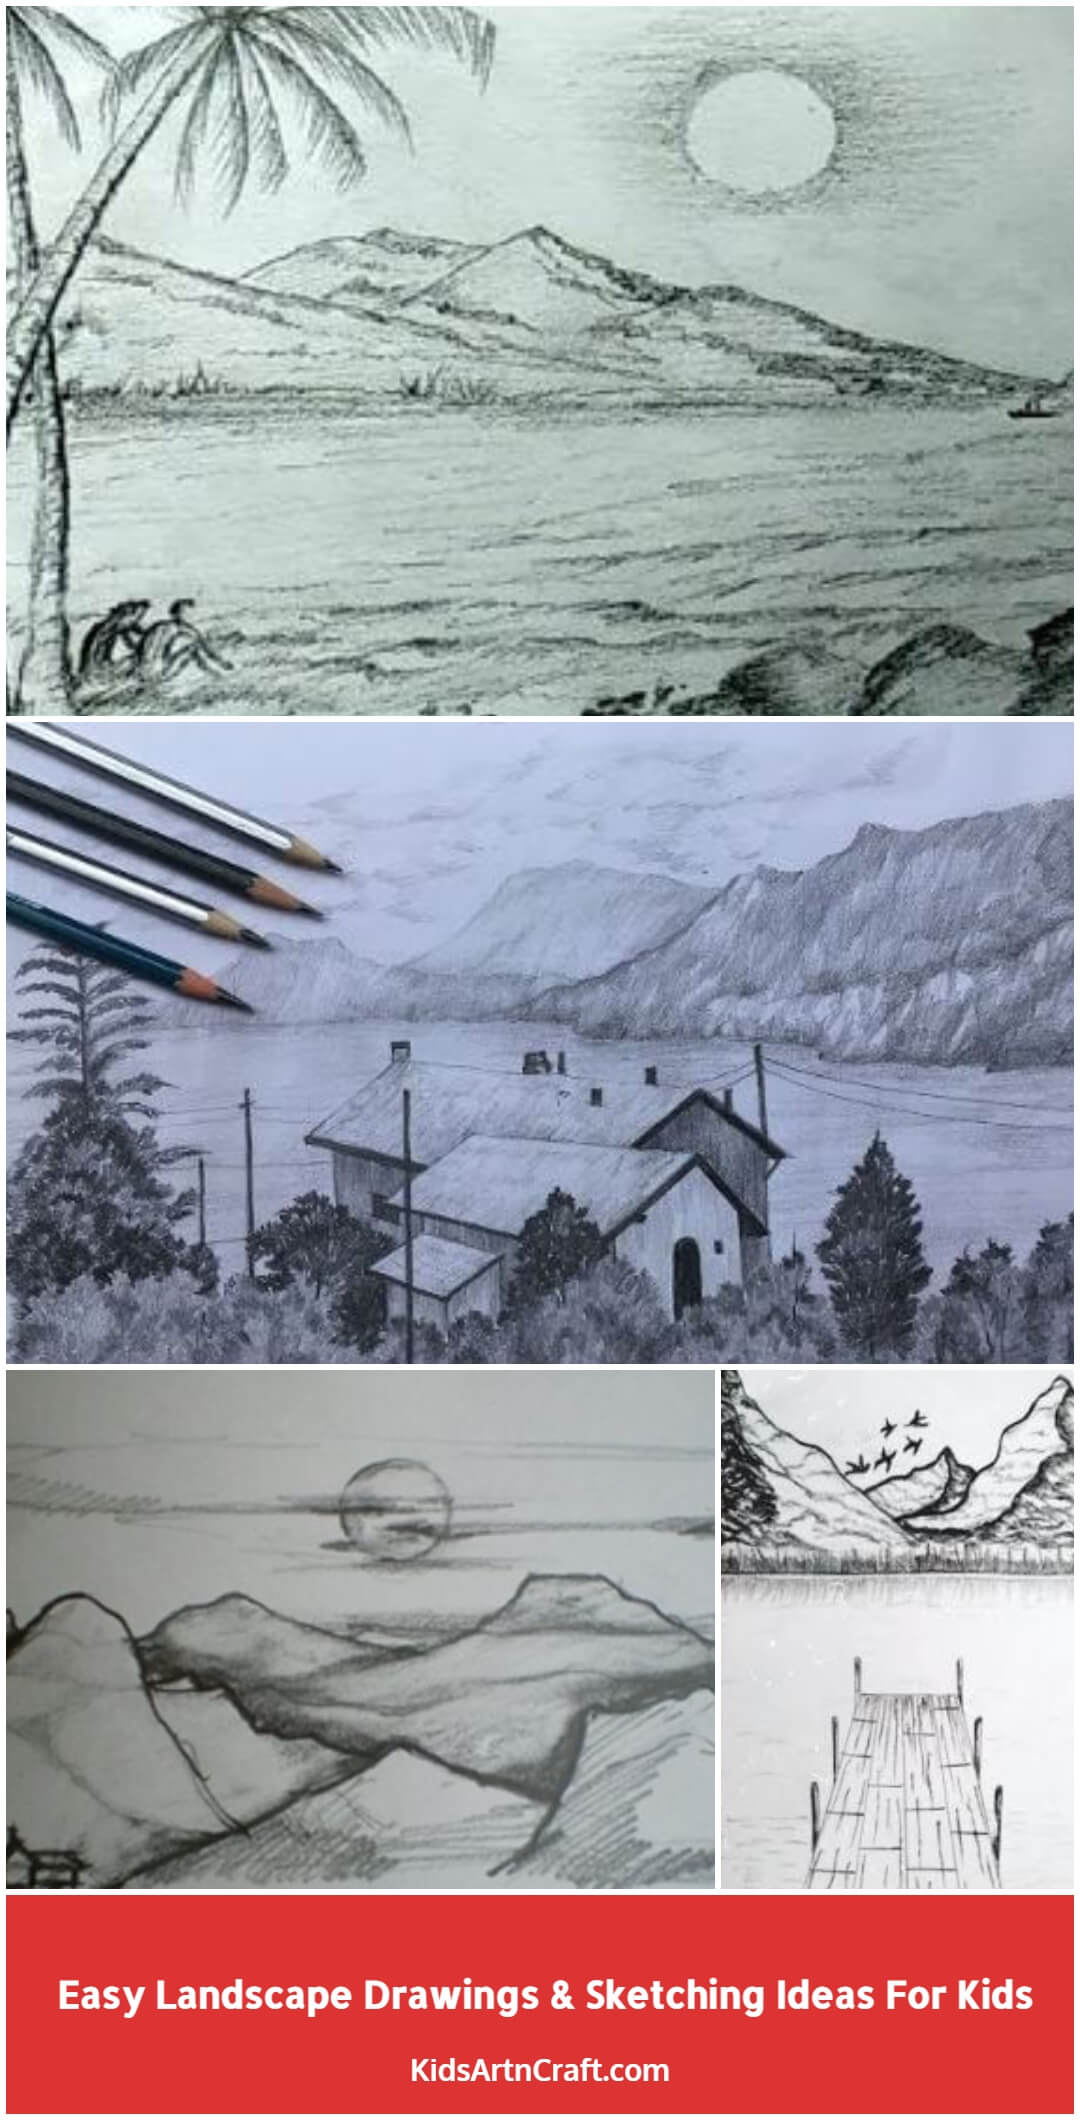 Draw a simple Landscape - Easy Pencil Sketch - YouTube